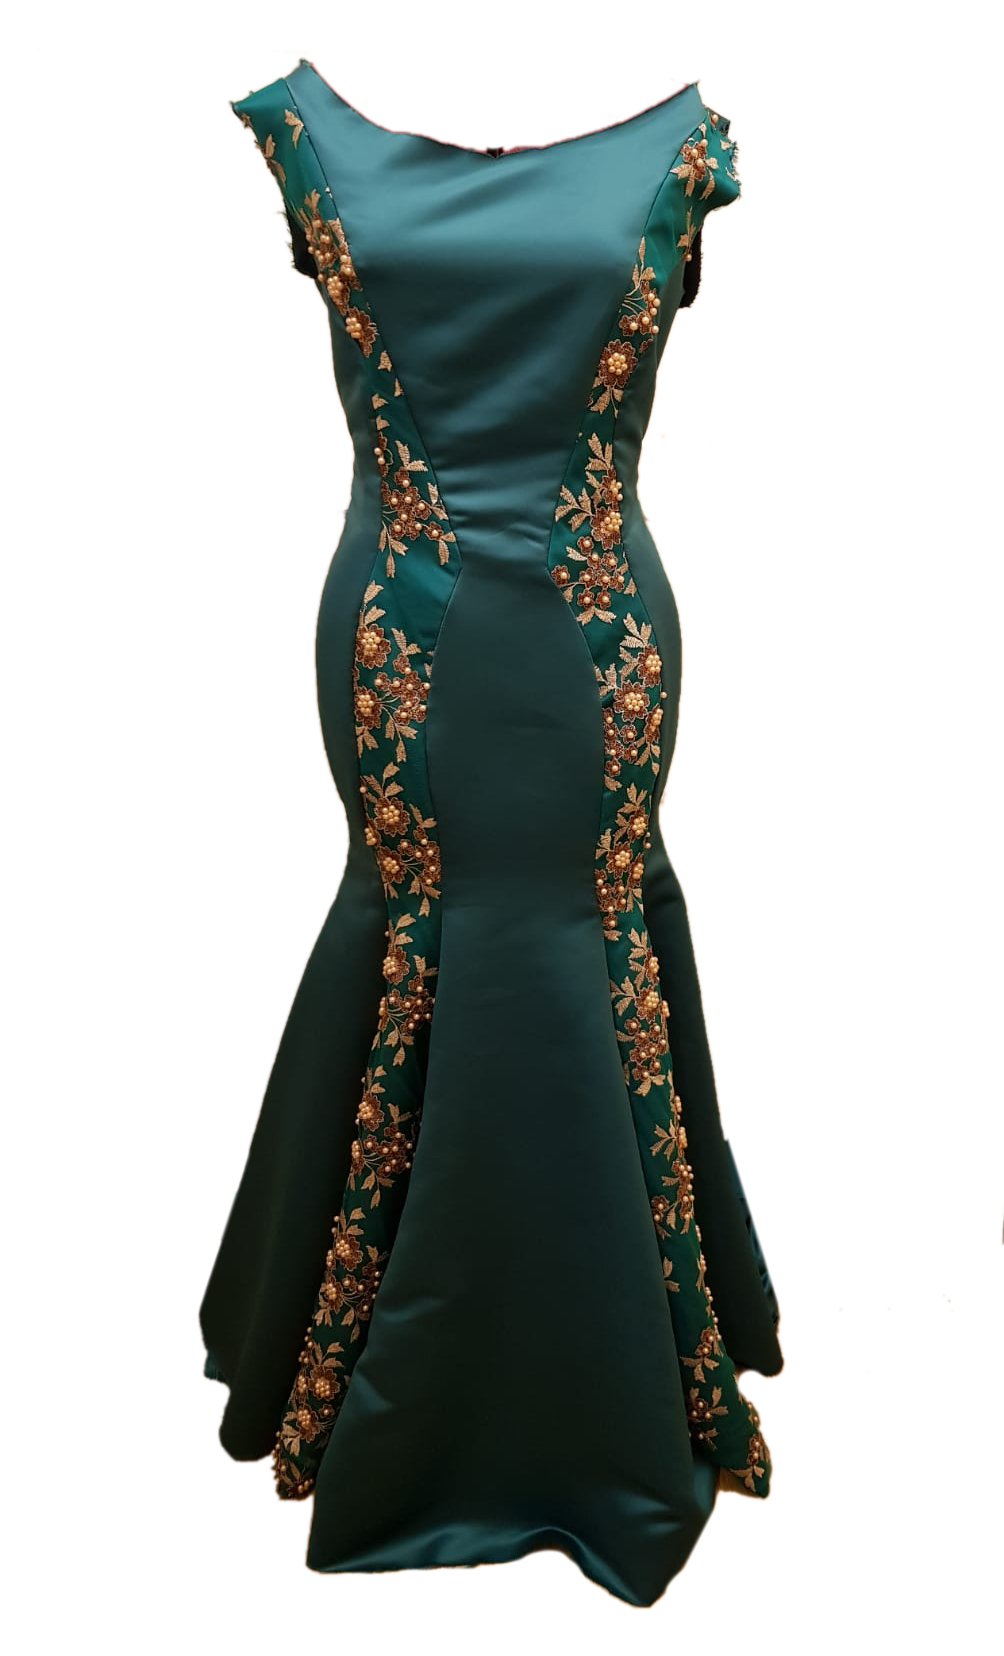 Emerald and Gold Embellishment Satin Mermaid Gown